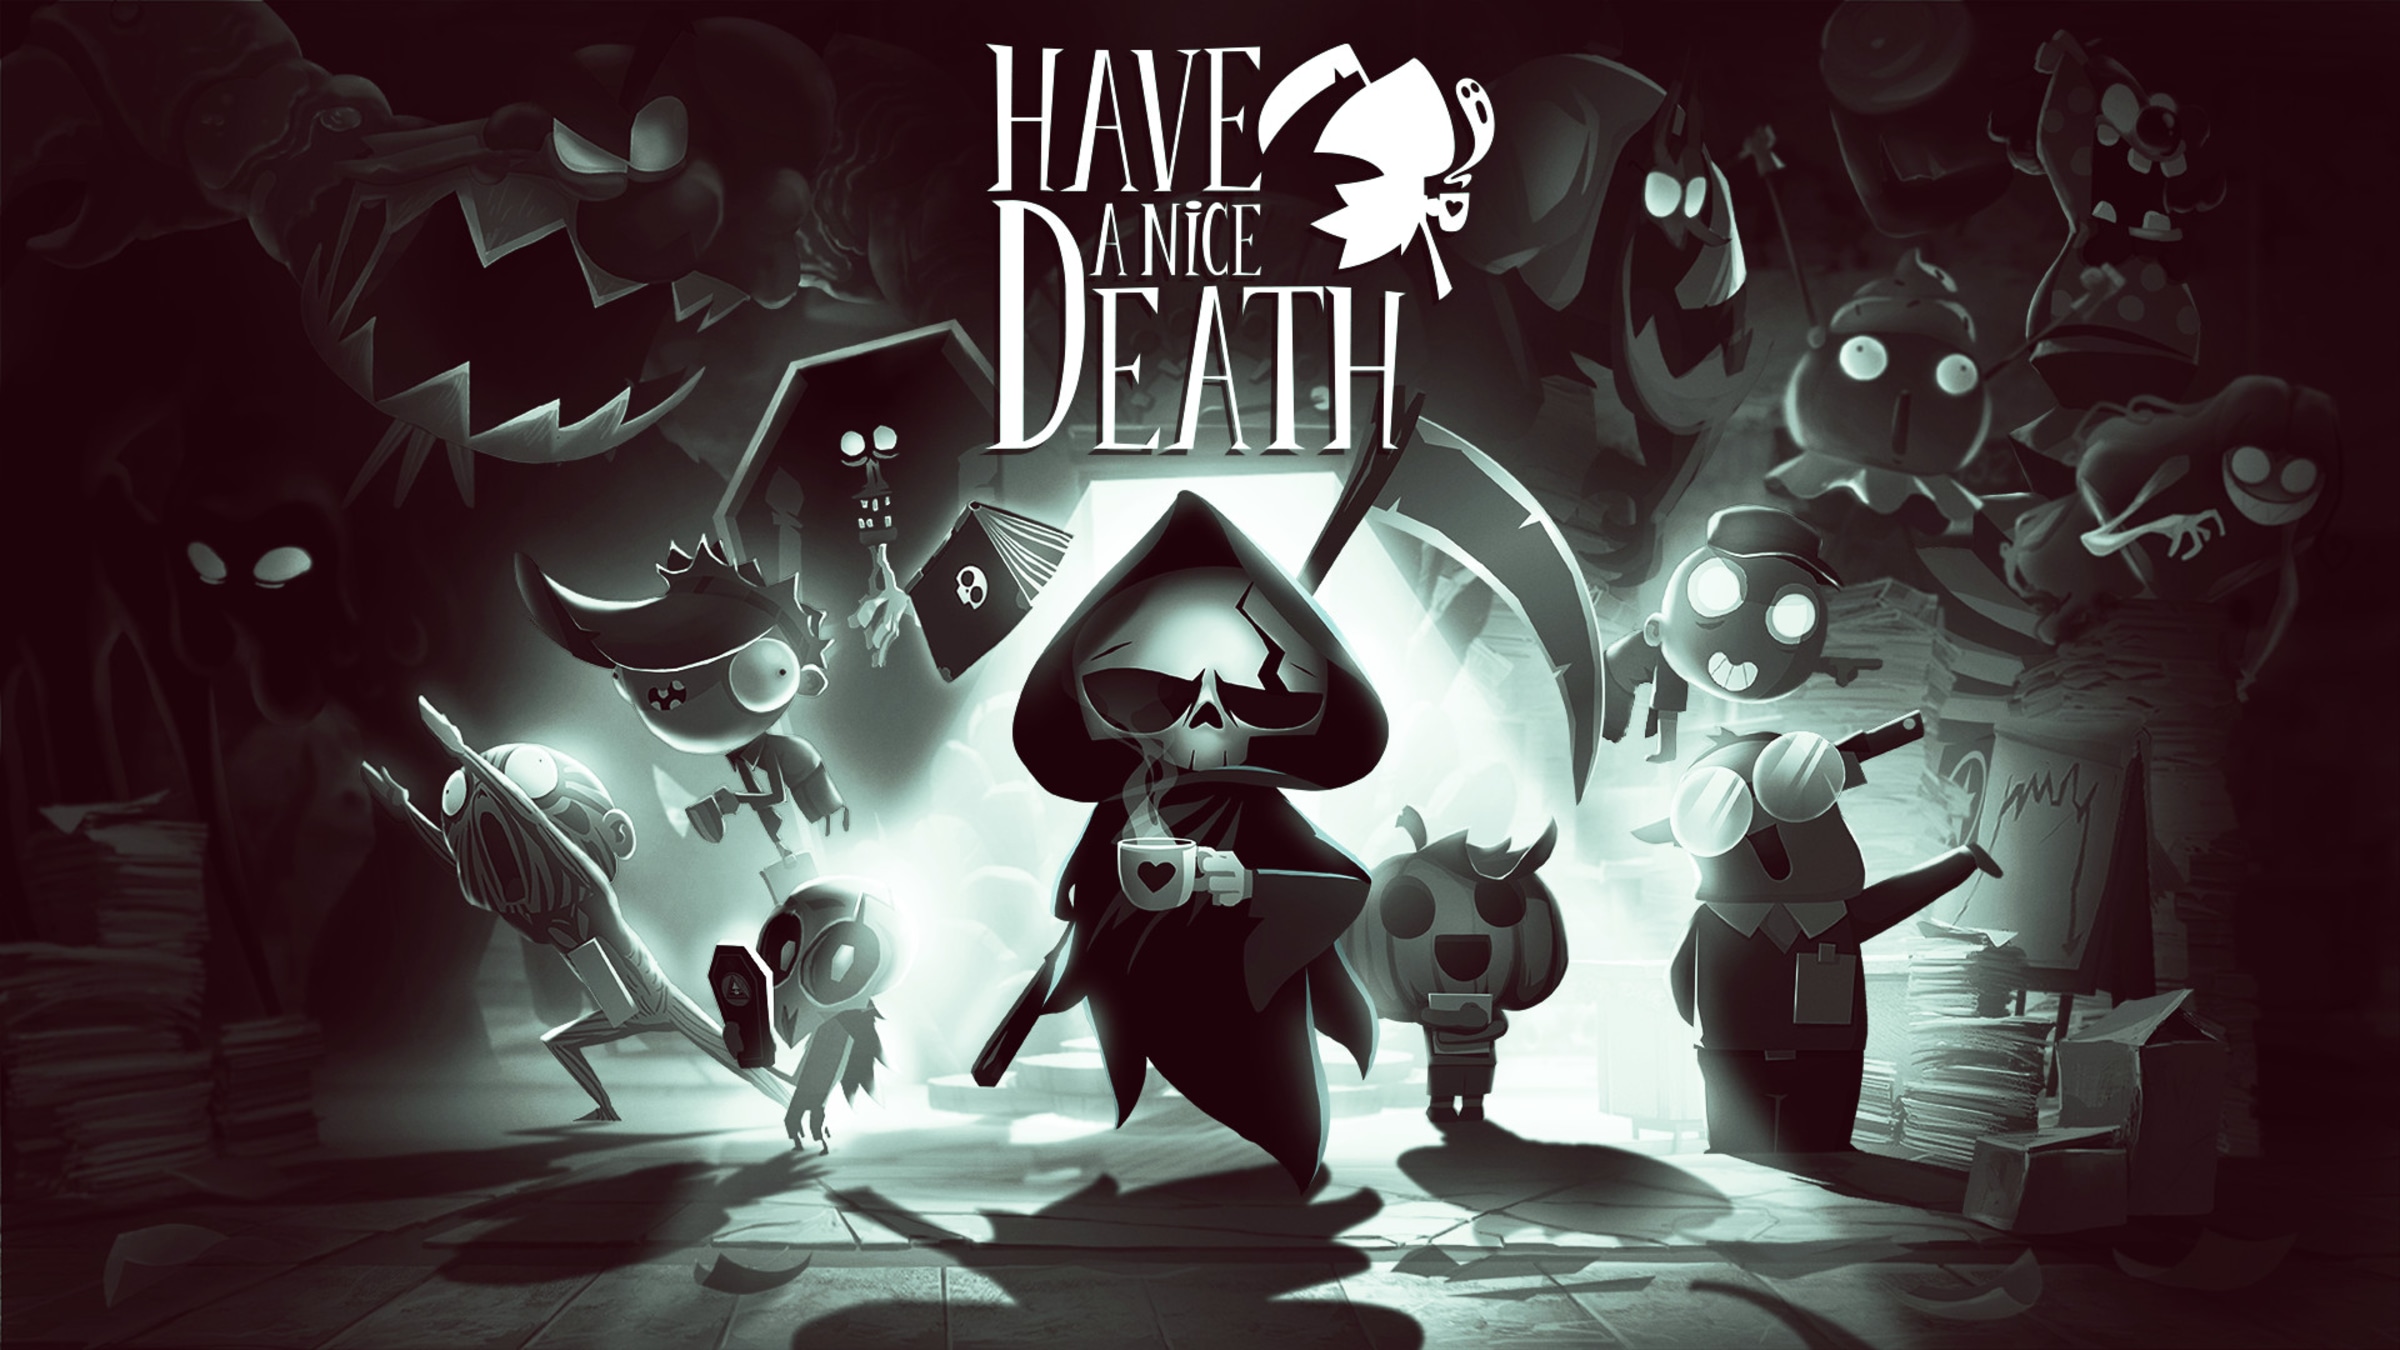 A Death for Switch - Nintendo Official Site